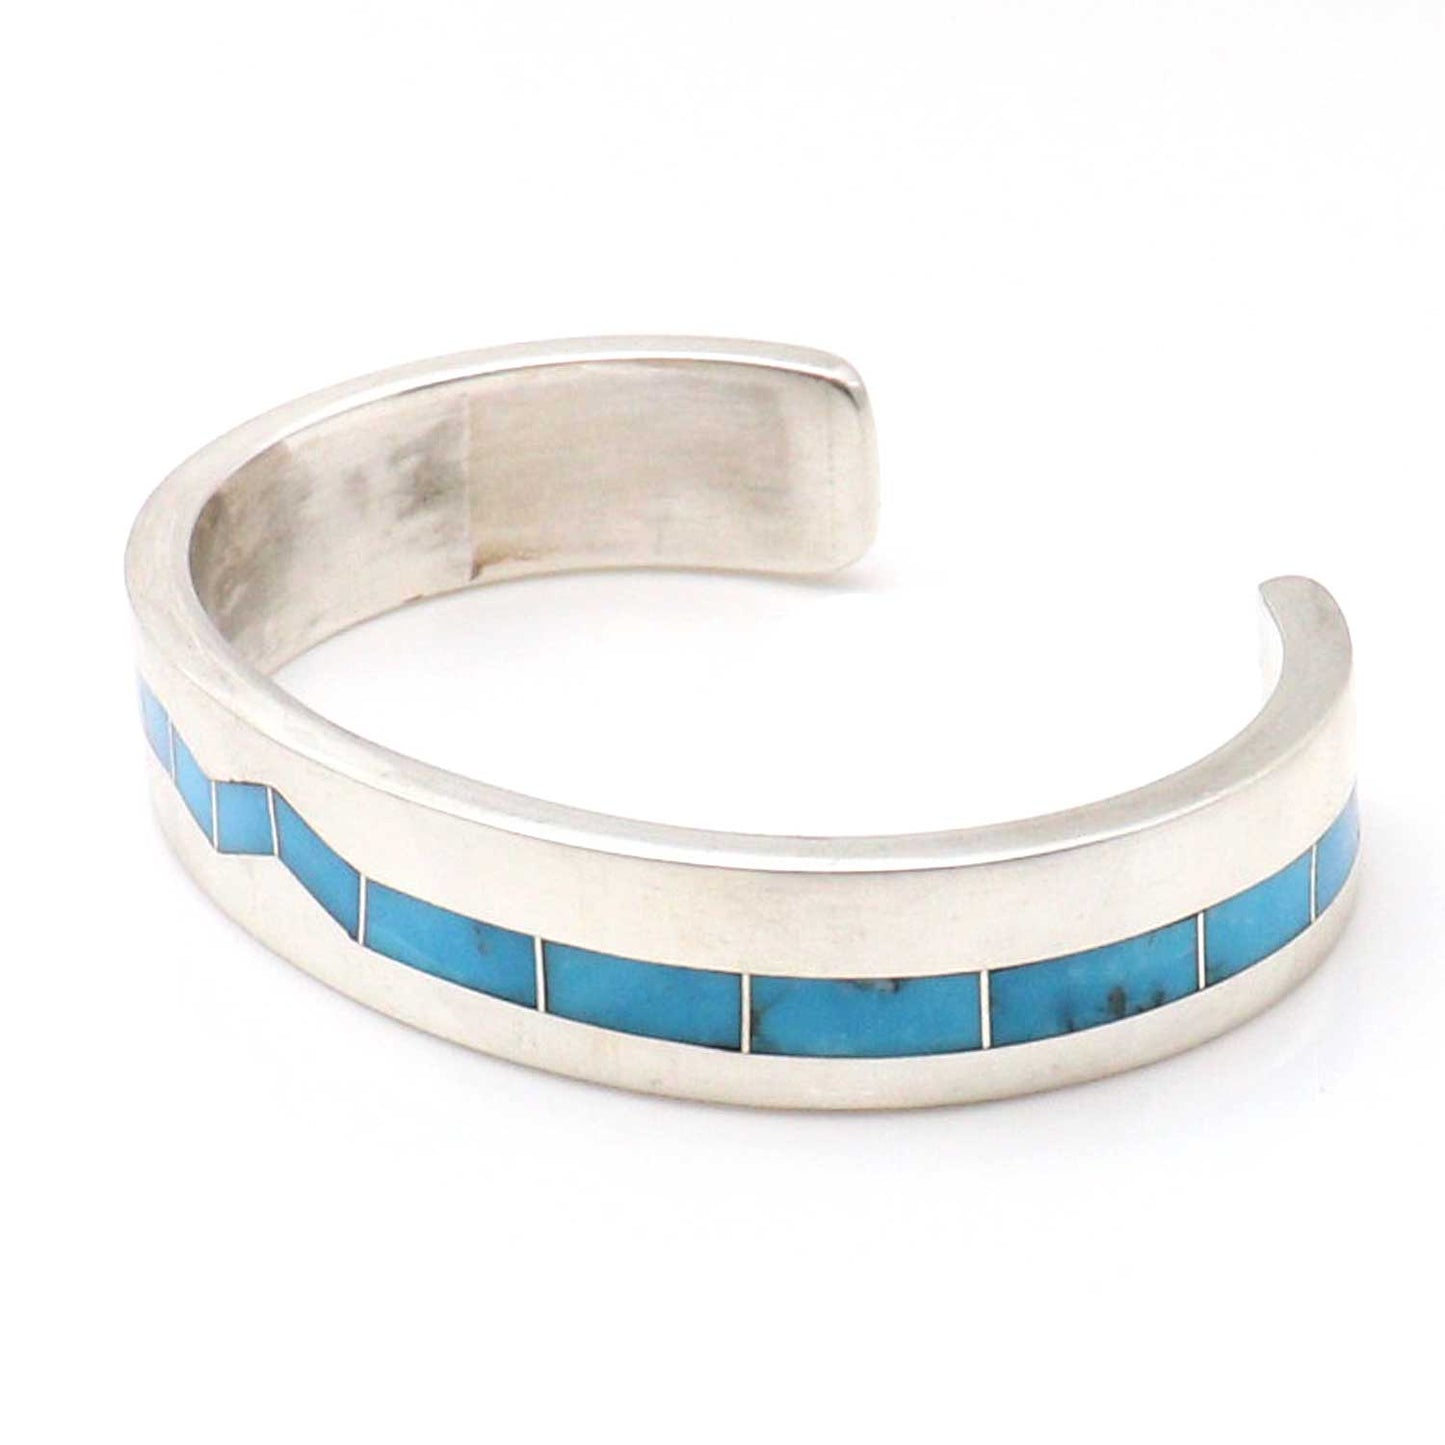 Men's Turquoise Channel Inlay Bracelet by Larry Loretto